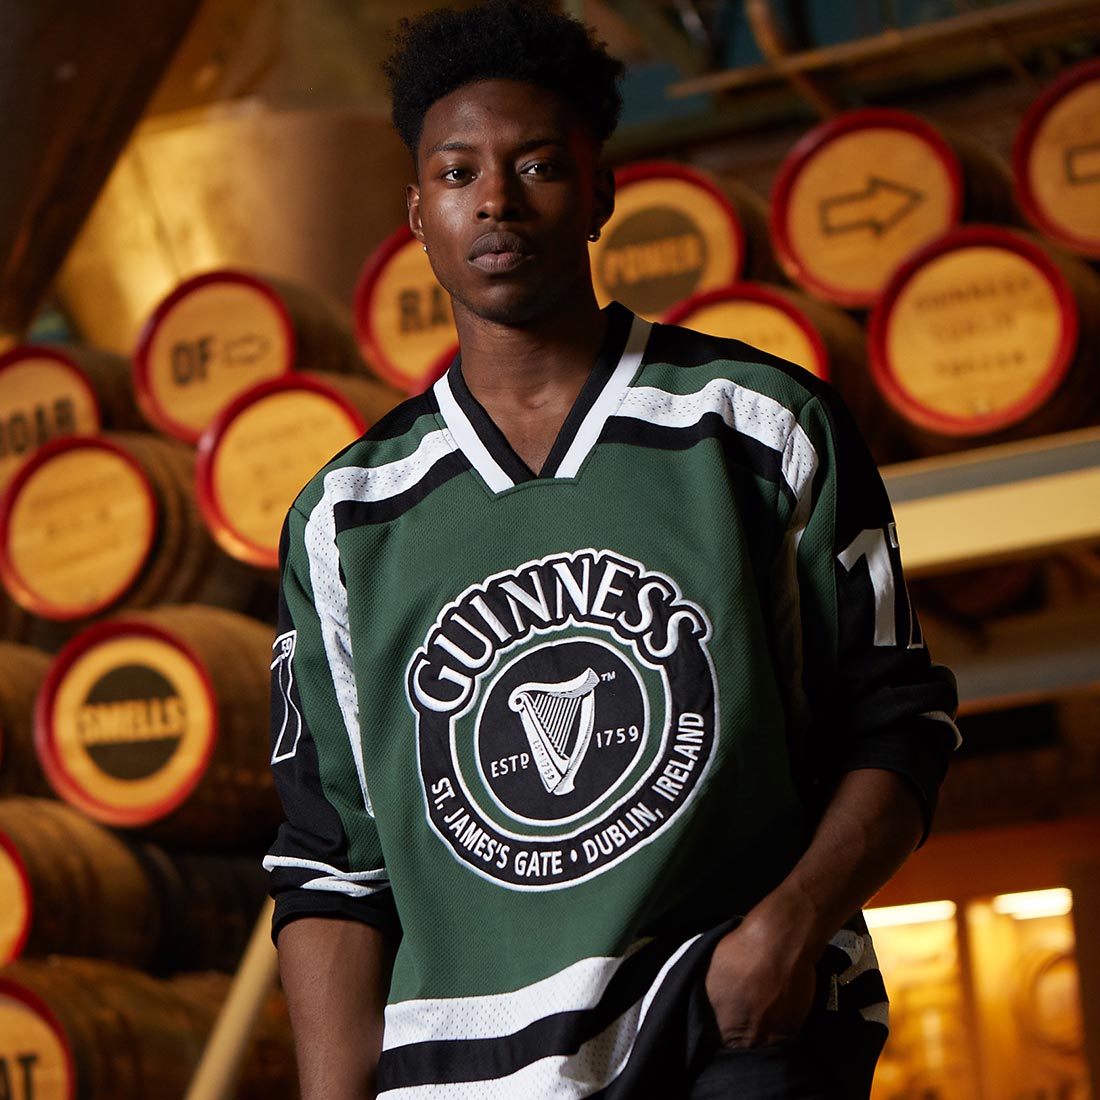 A young man wearing a Guinness Green & White Hockey Jersey made of polyester.